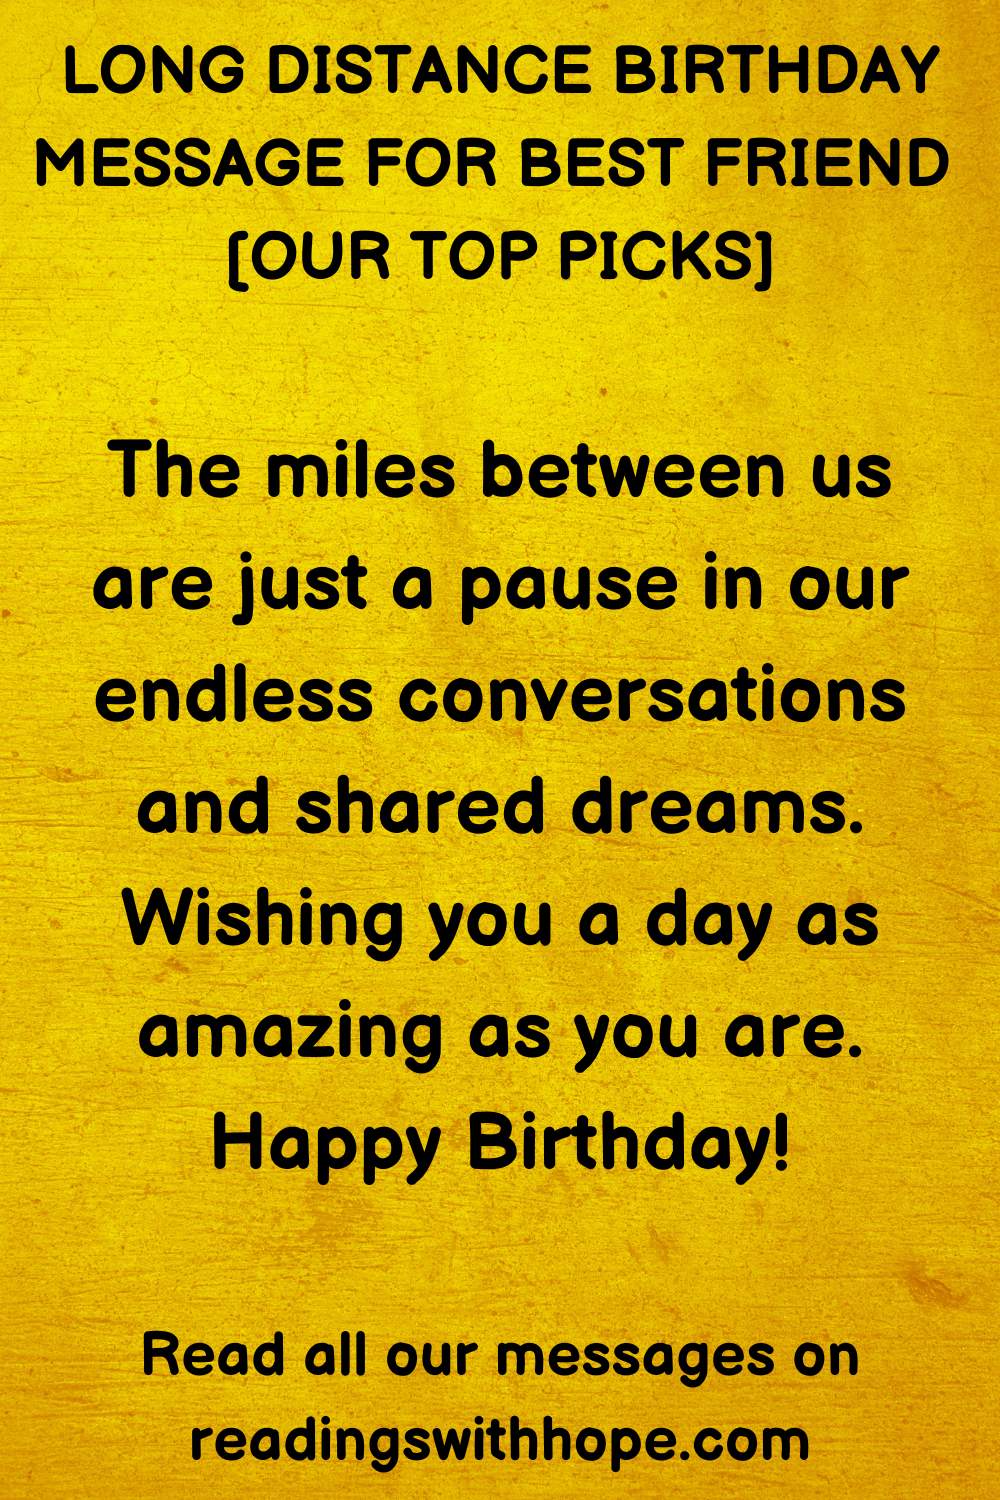 Long Distance Birthday Message for Best Friend 4